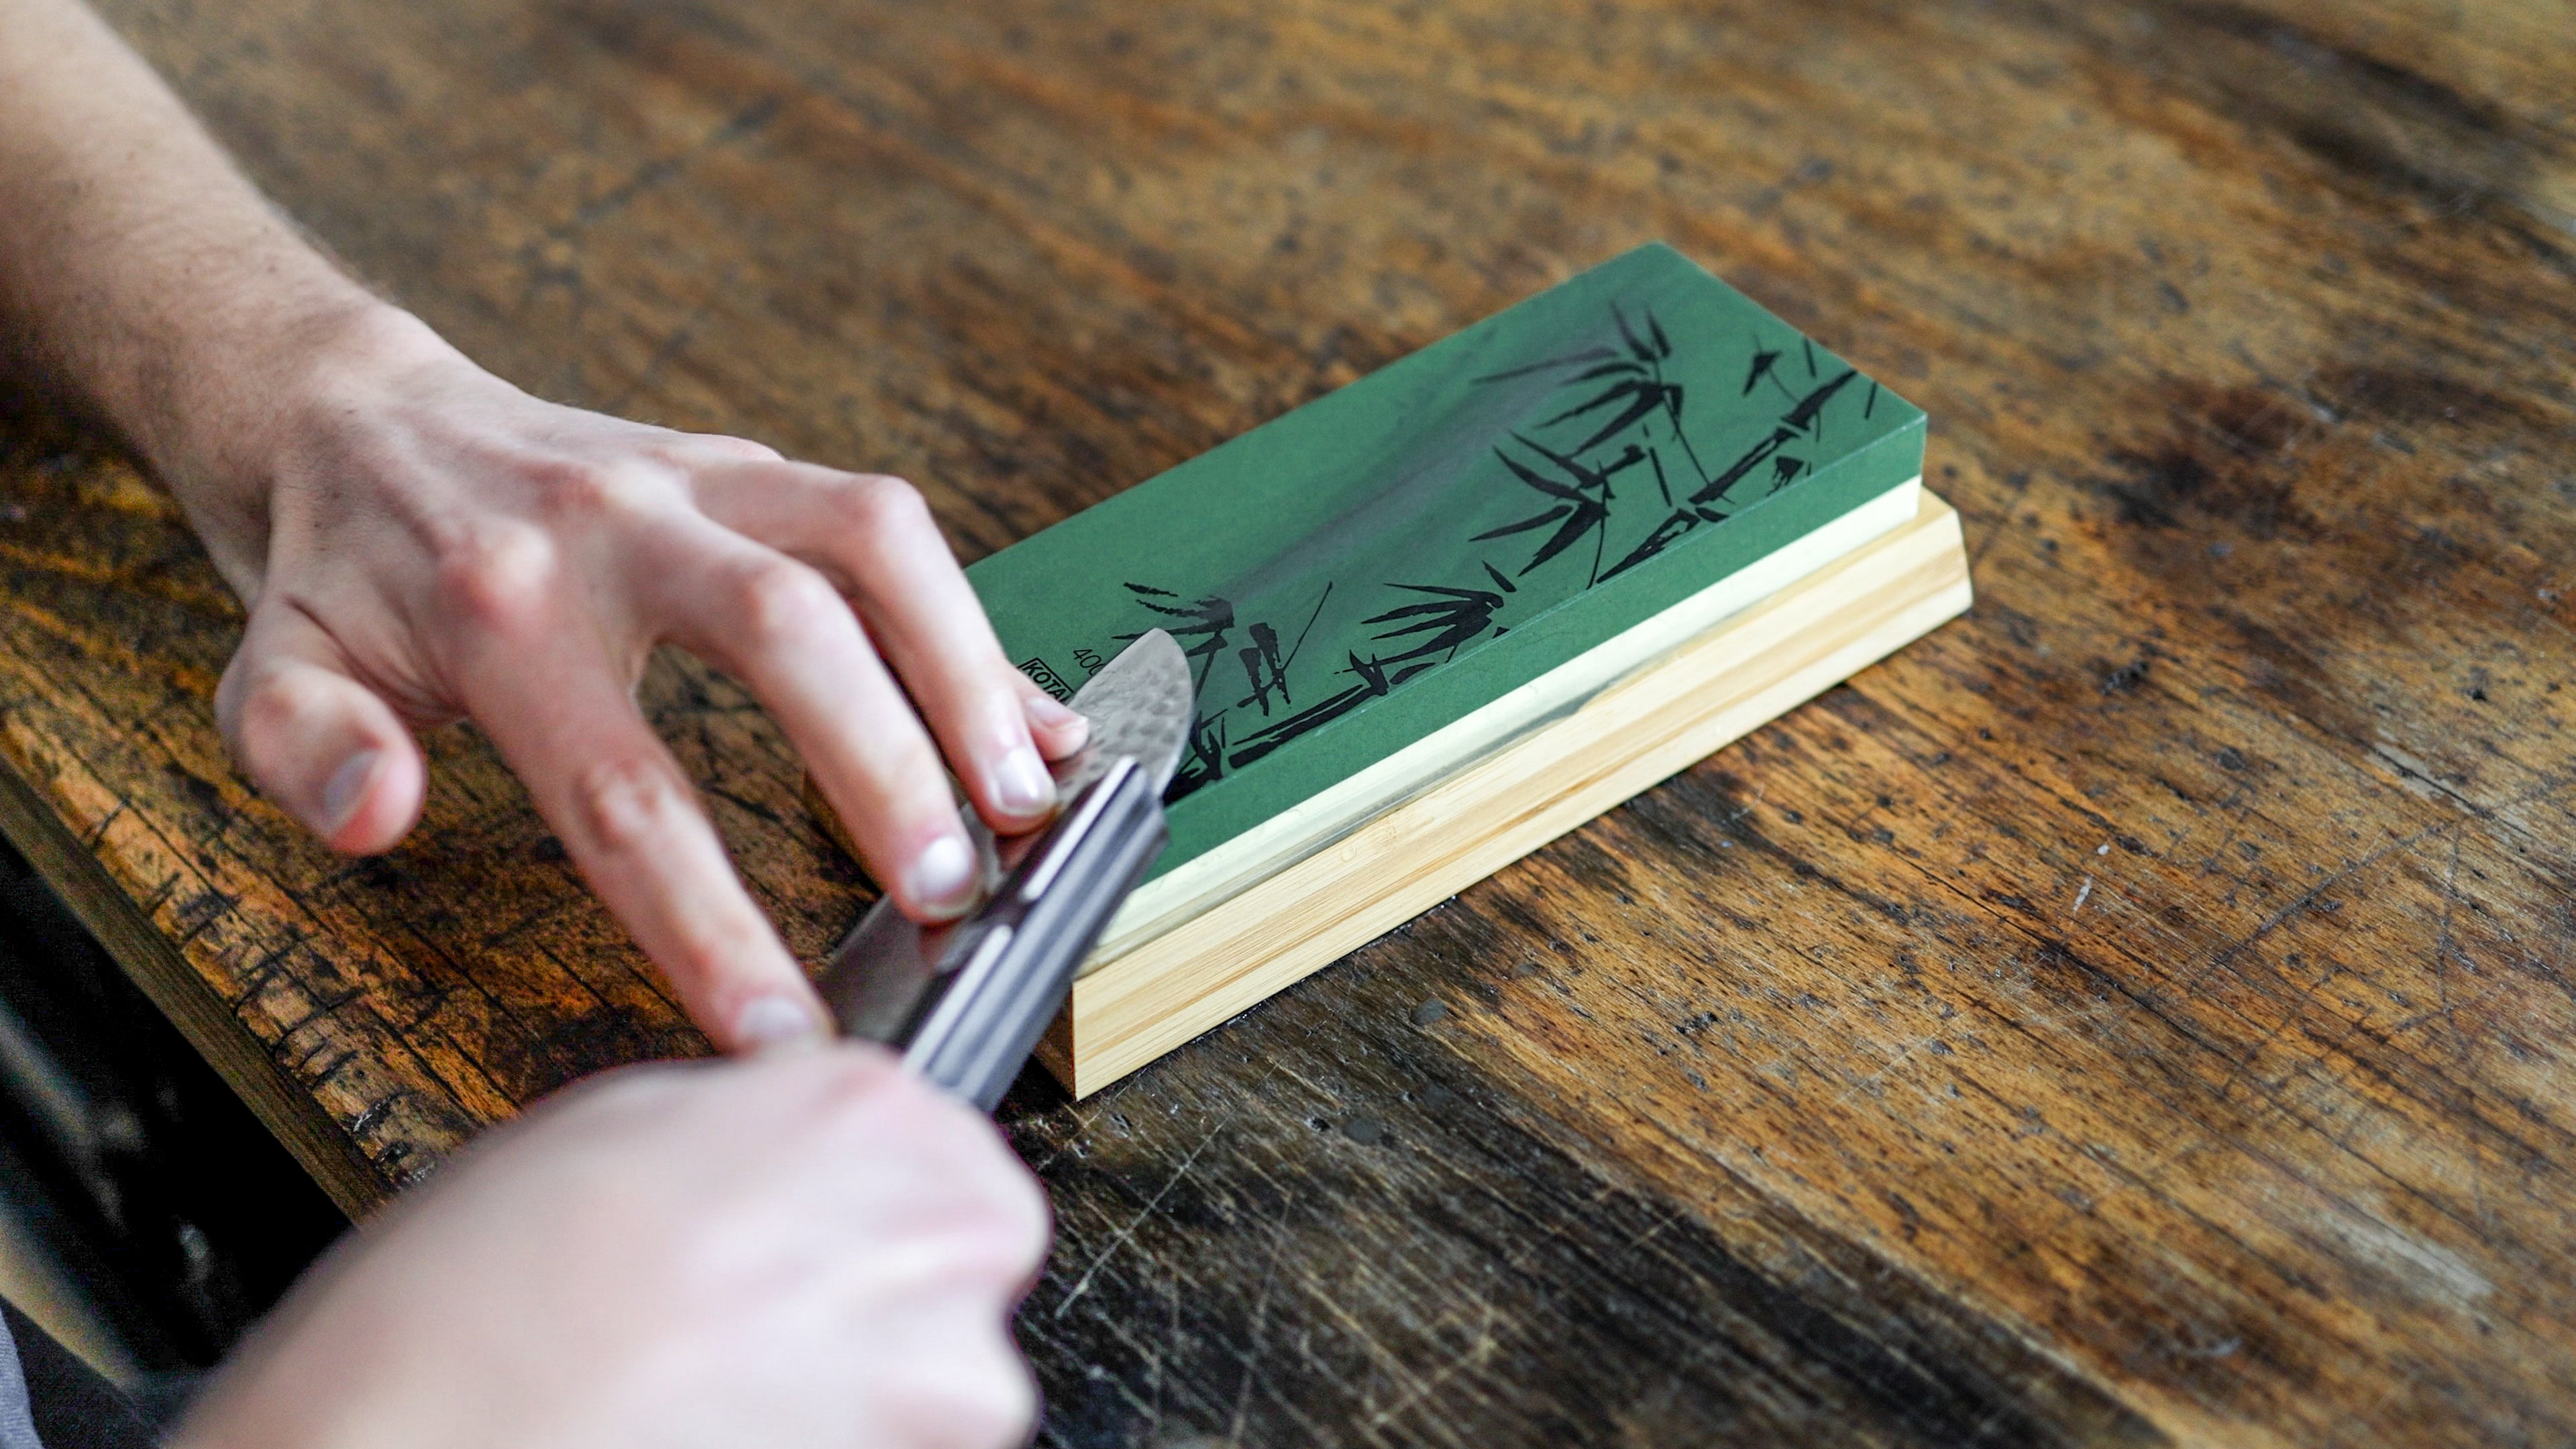 The model's hands are holding a KOTAI knife and preparing to sharpen it with a 400/1000 whetstone.